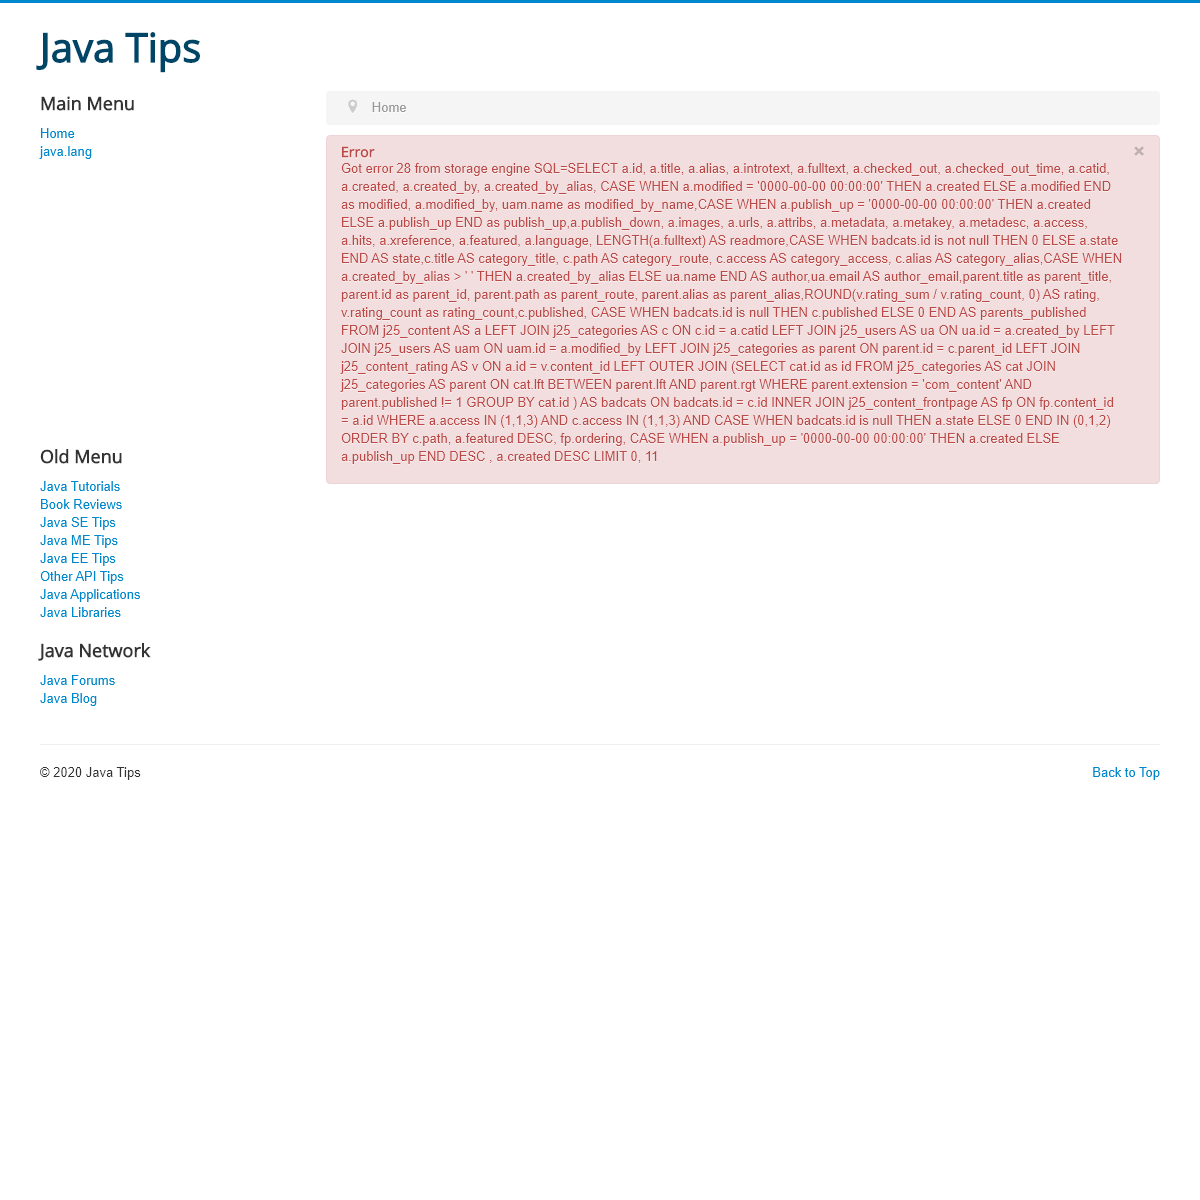 A complete backup of java-tips.org